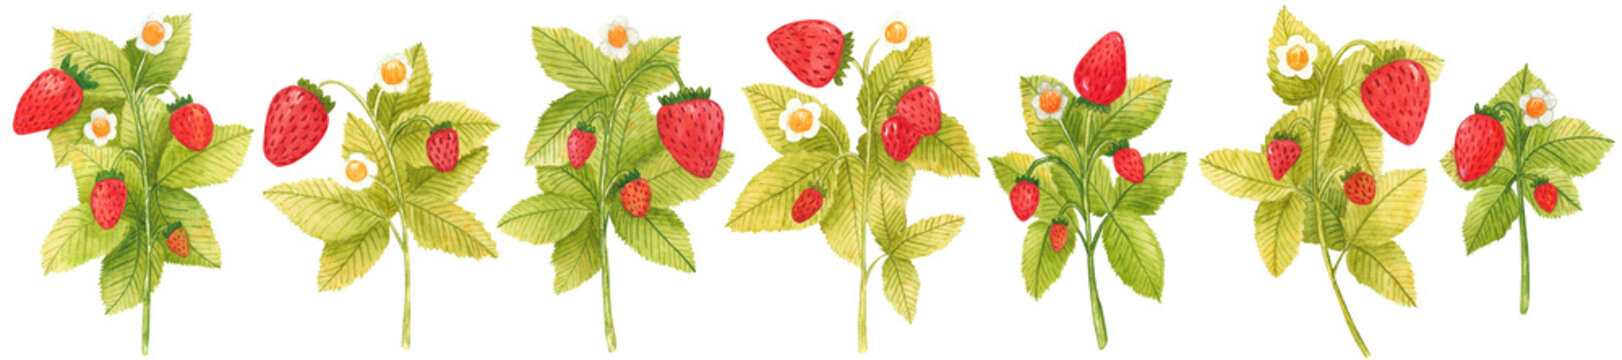 Set of hand drawn watercolor strawberry branches isolated on white background. Fresh summer berries with leaves and flower for print, card, sticker, textile design, product packaging